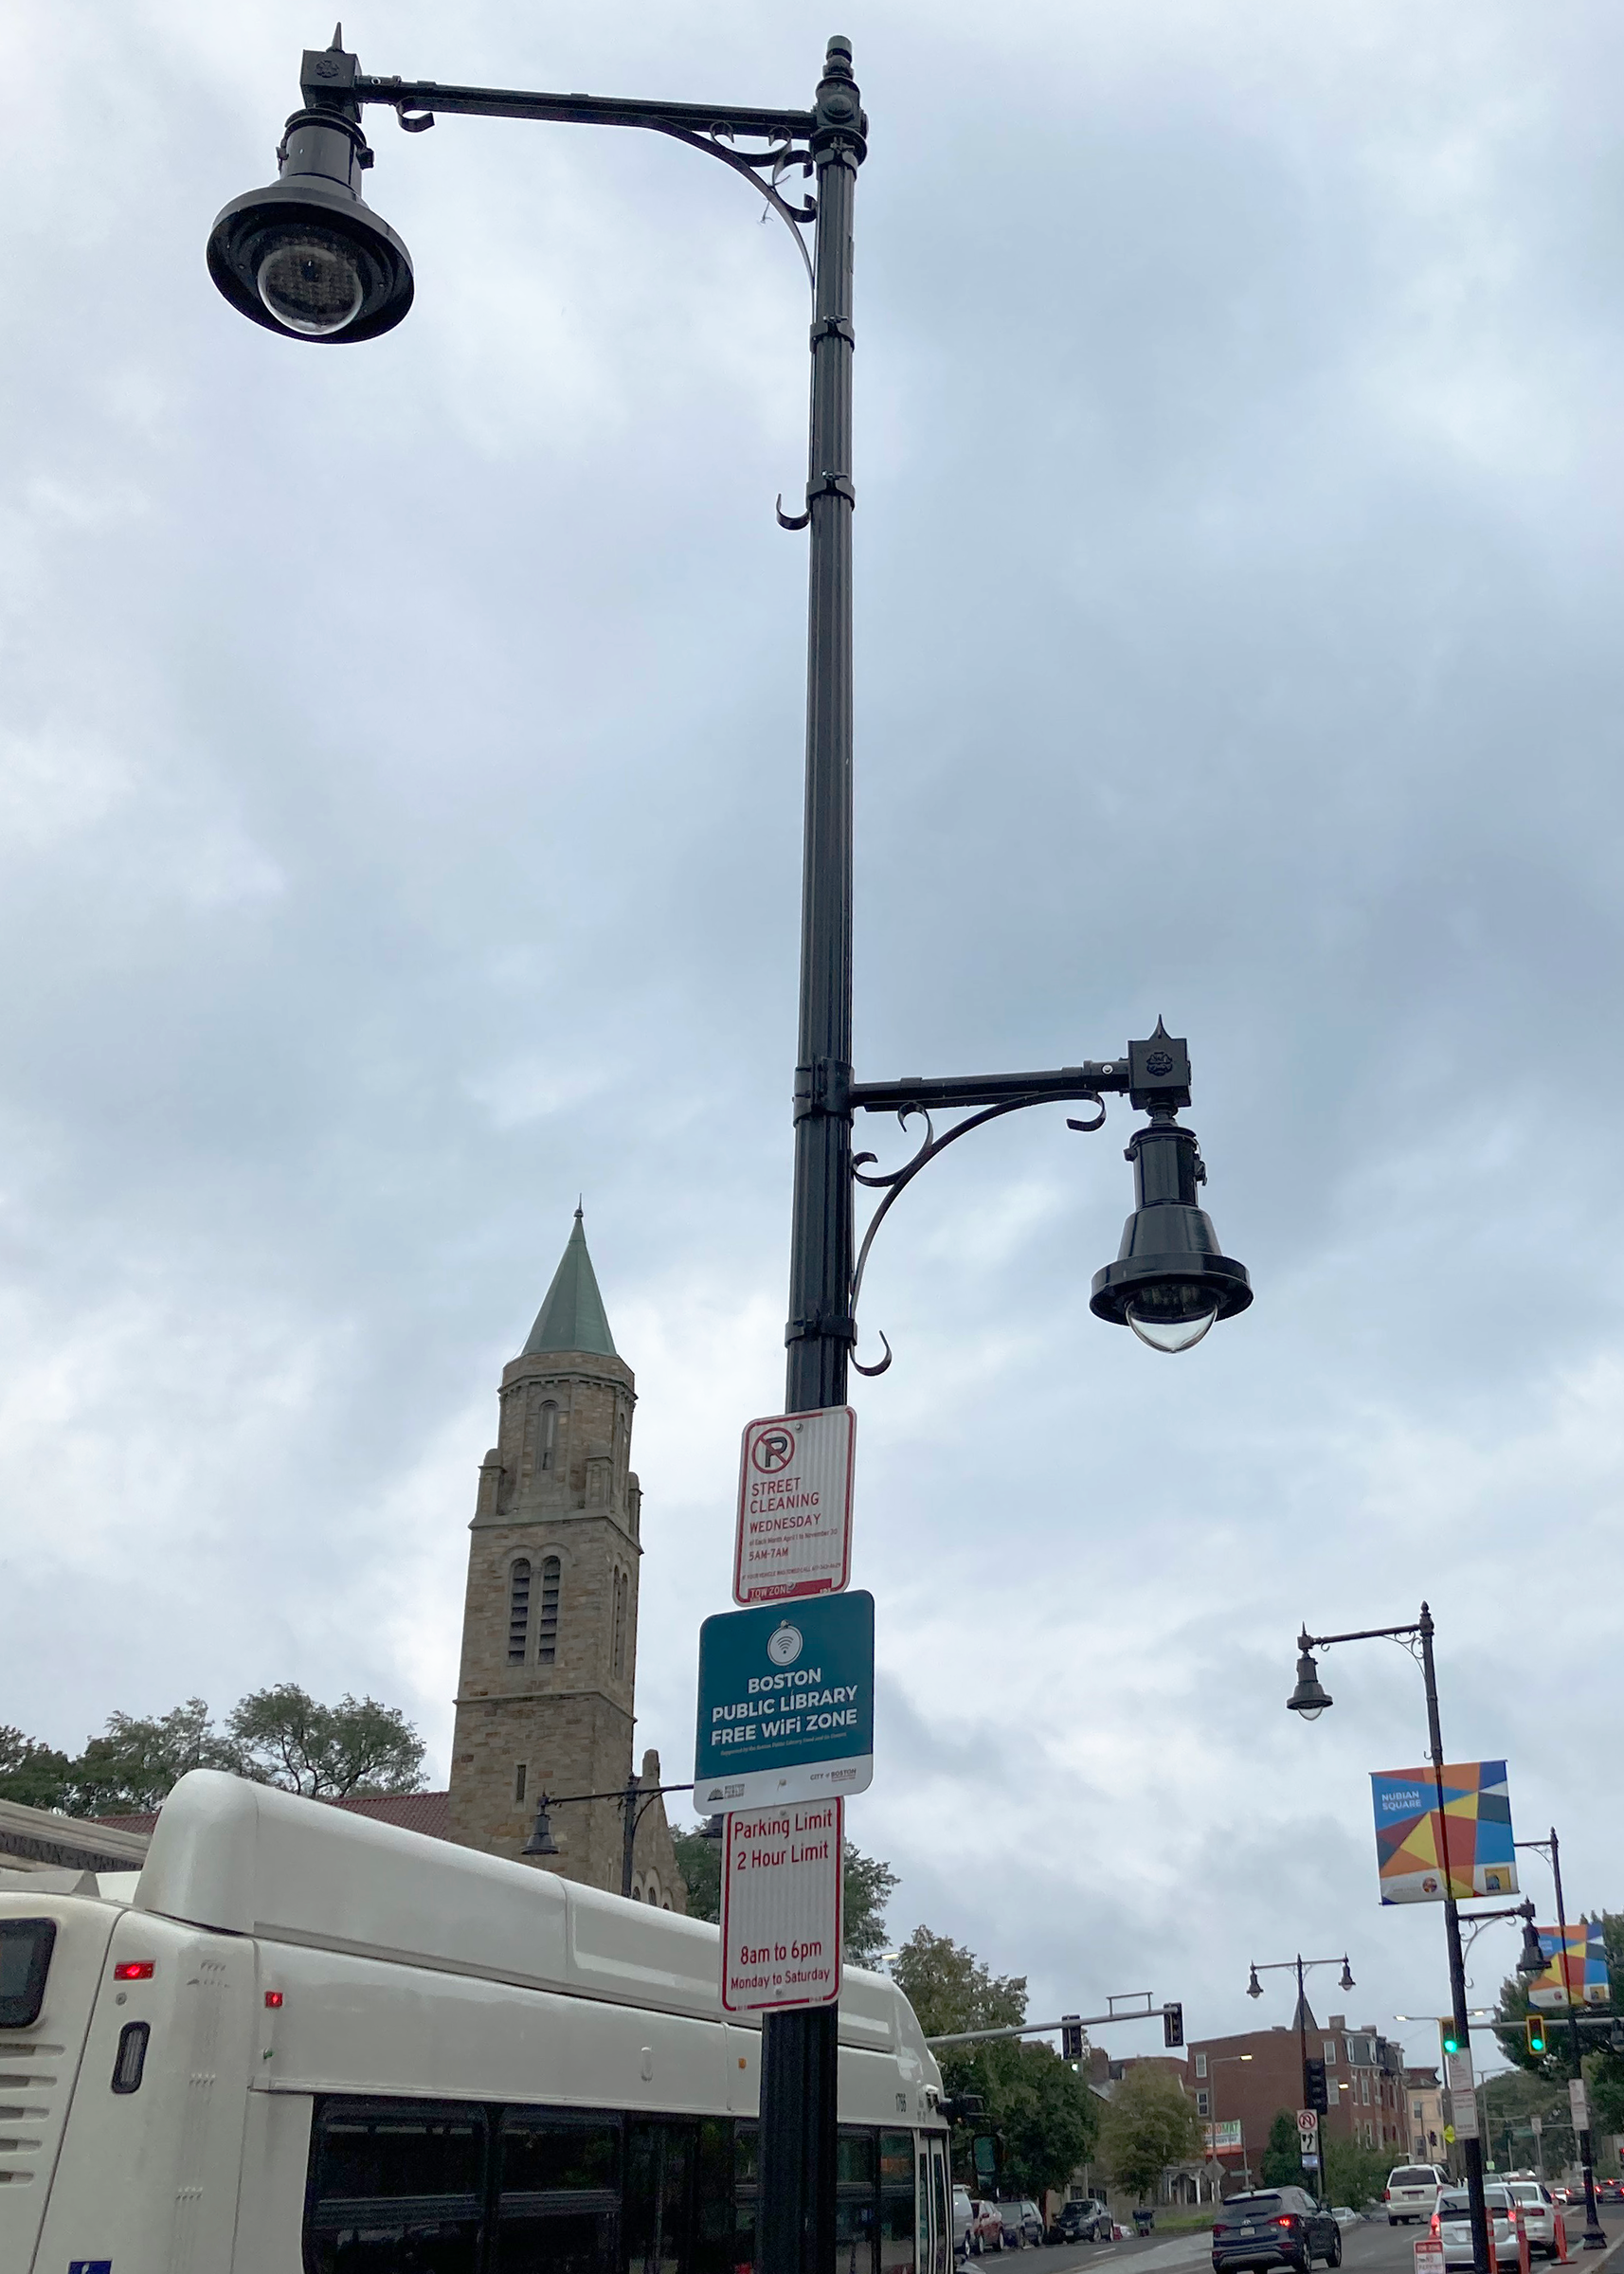 A pendant-style street light has one large, down-facing light hang approximately 4' over the roadway. A second, smaller pendant-style light  is on the same pole, but directed over the sidewalk. 